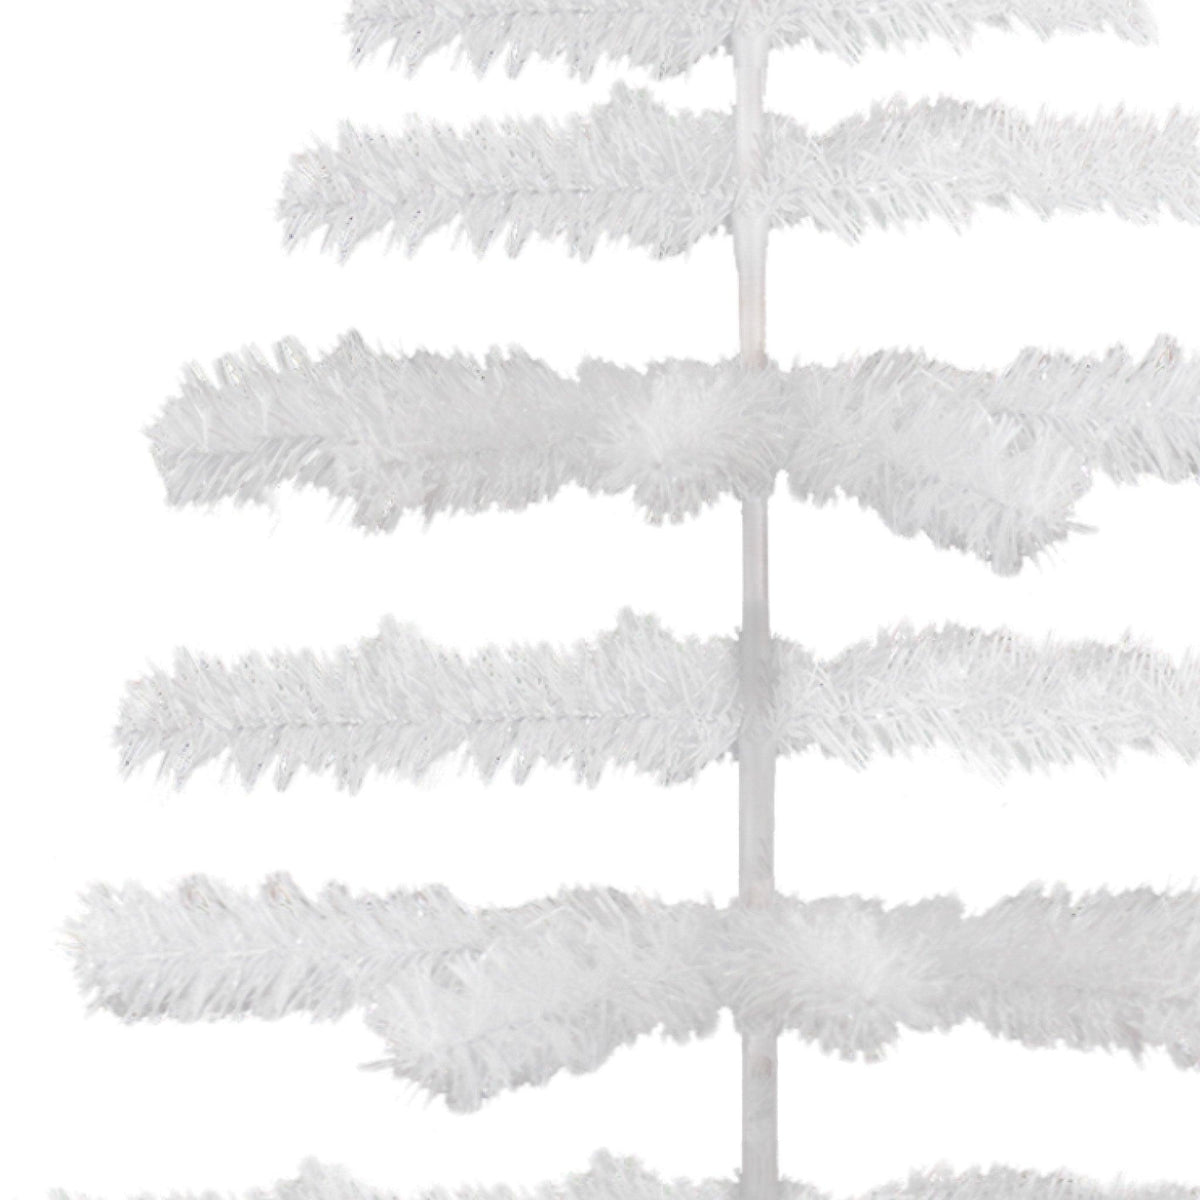 Middle branches of the 60in Tall White Tinsel Tree. Lee Display's 5ft White Tinsel Christmas Tree on sale now at leedisplay.com